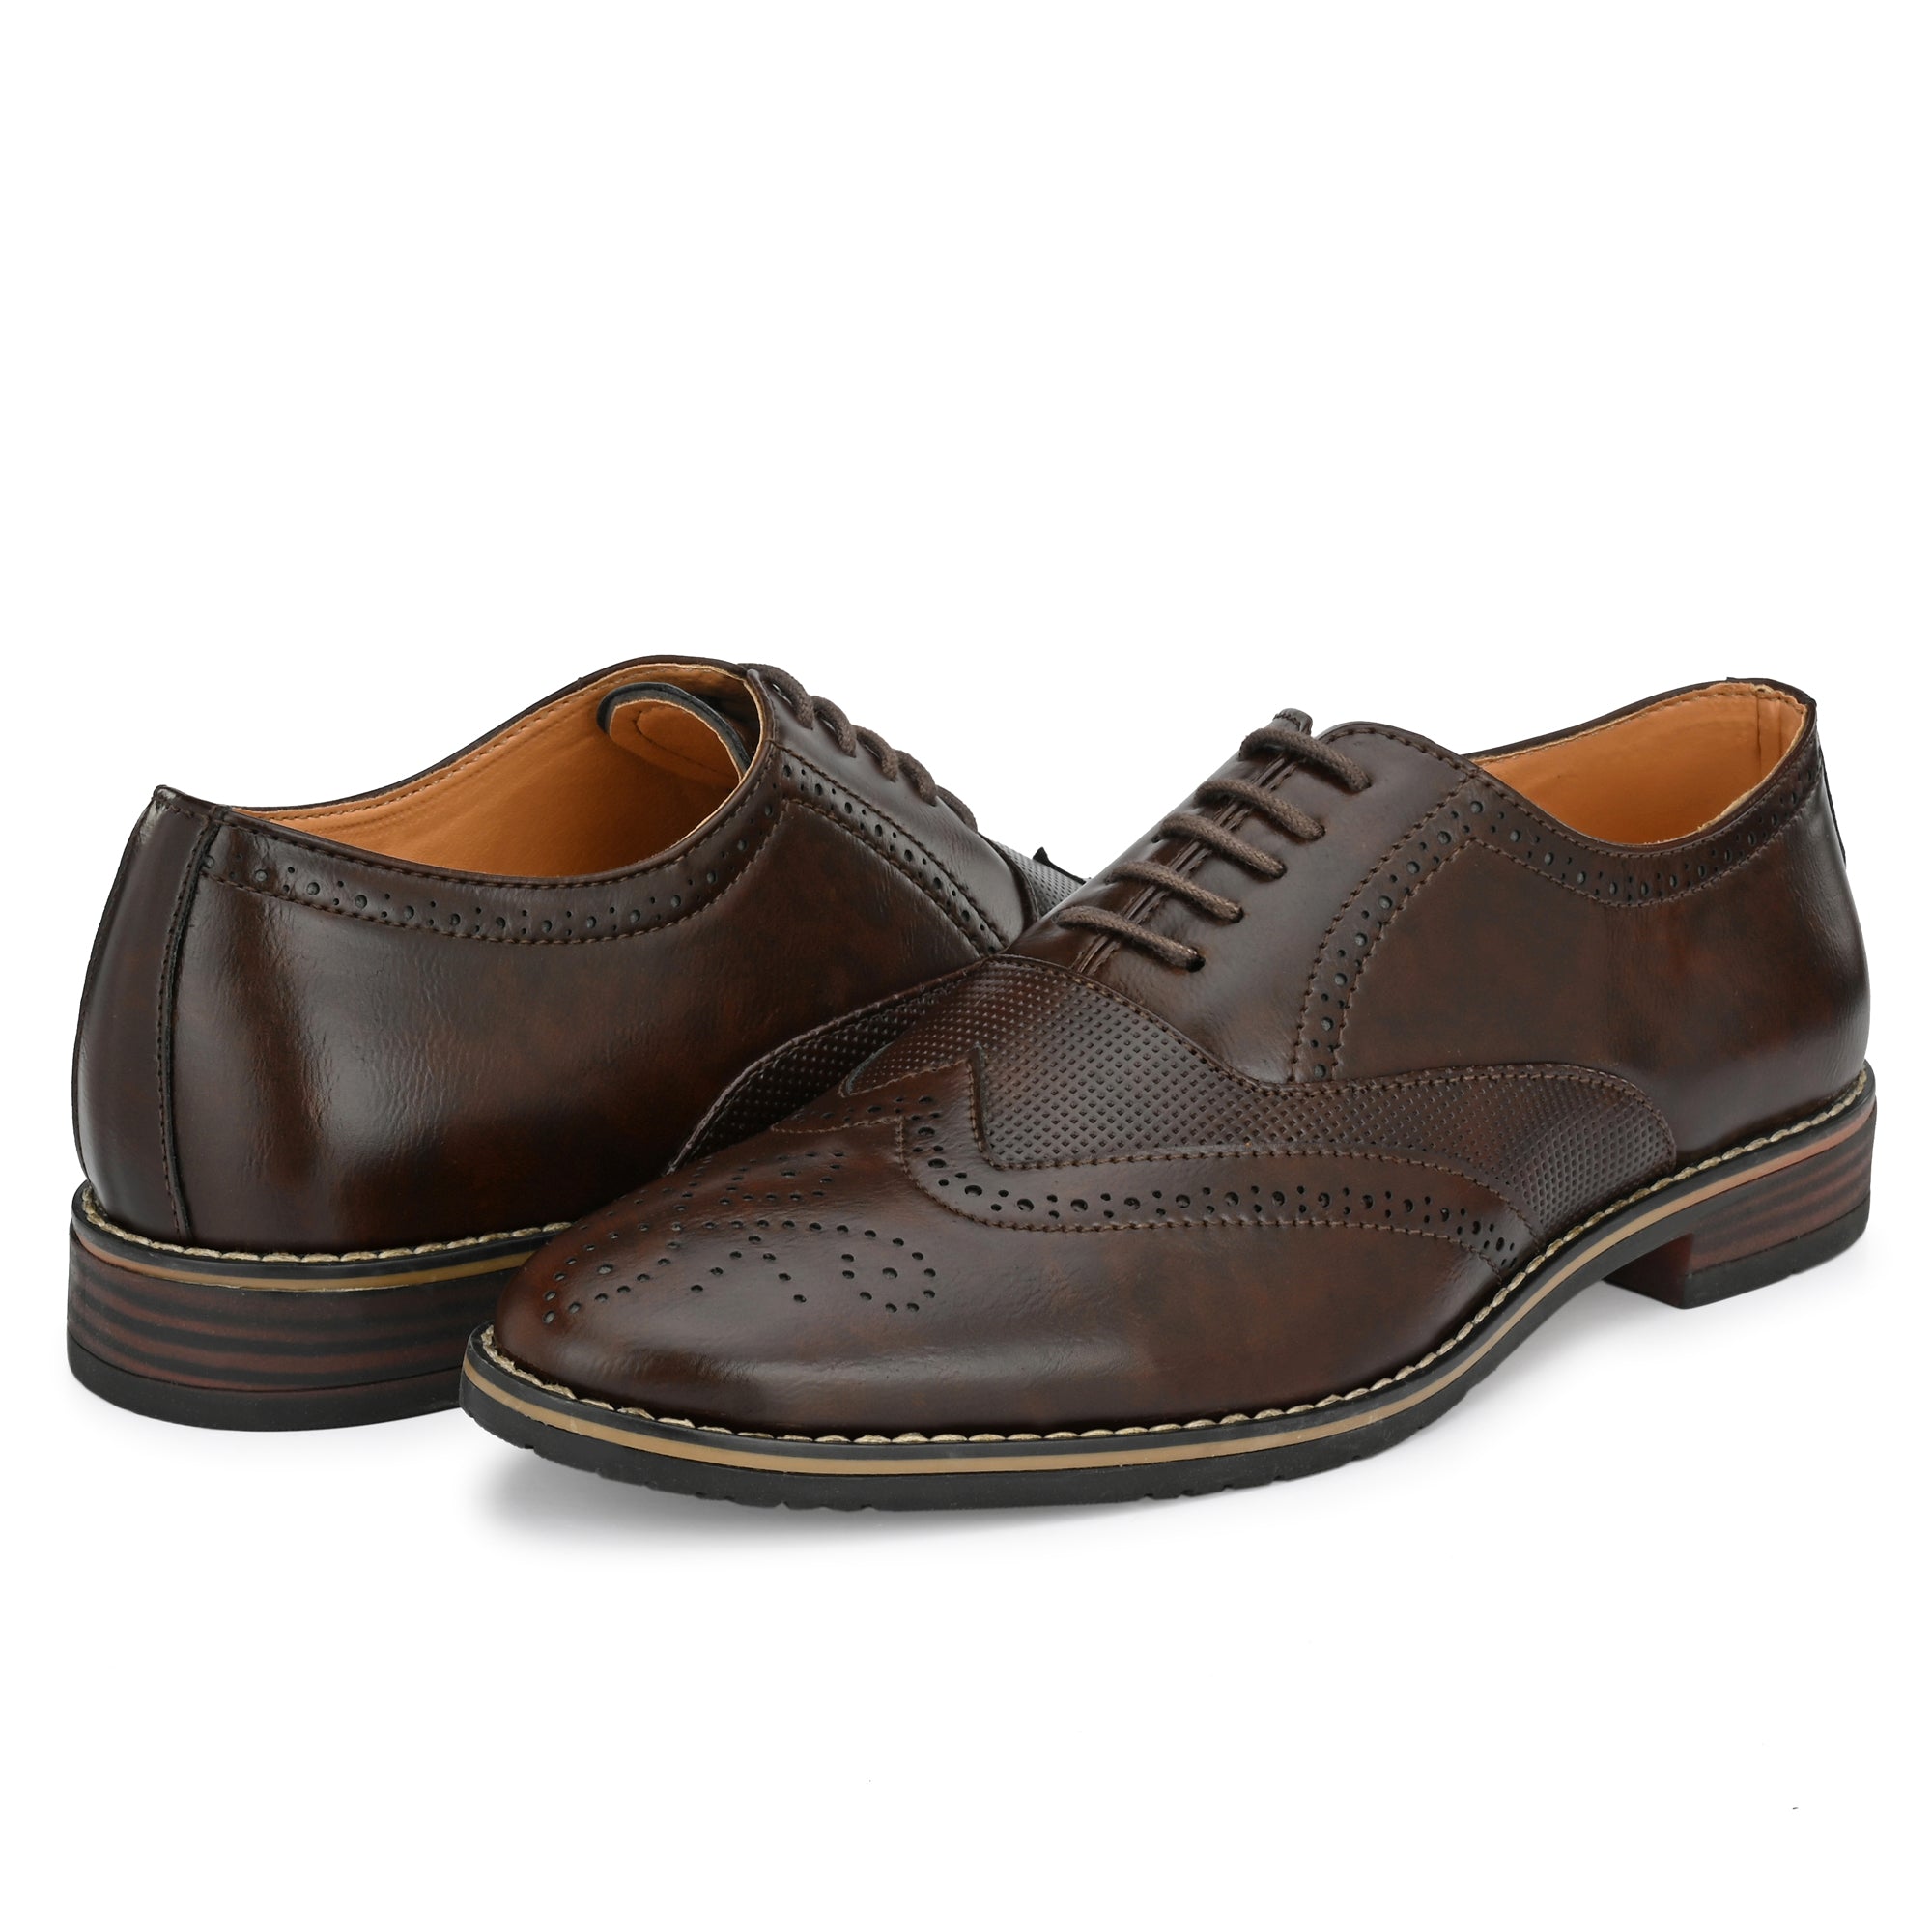 Attitudist Handcrafted Brown Formal Lace-up Derby Shoes Full Brouges With Wingtips For Men MTOBSF